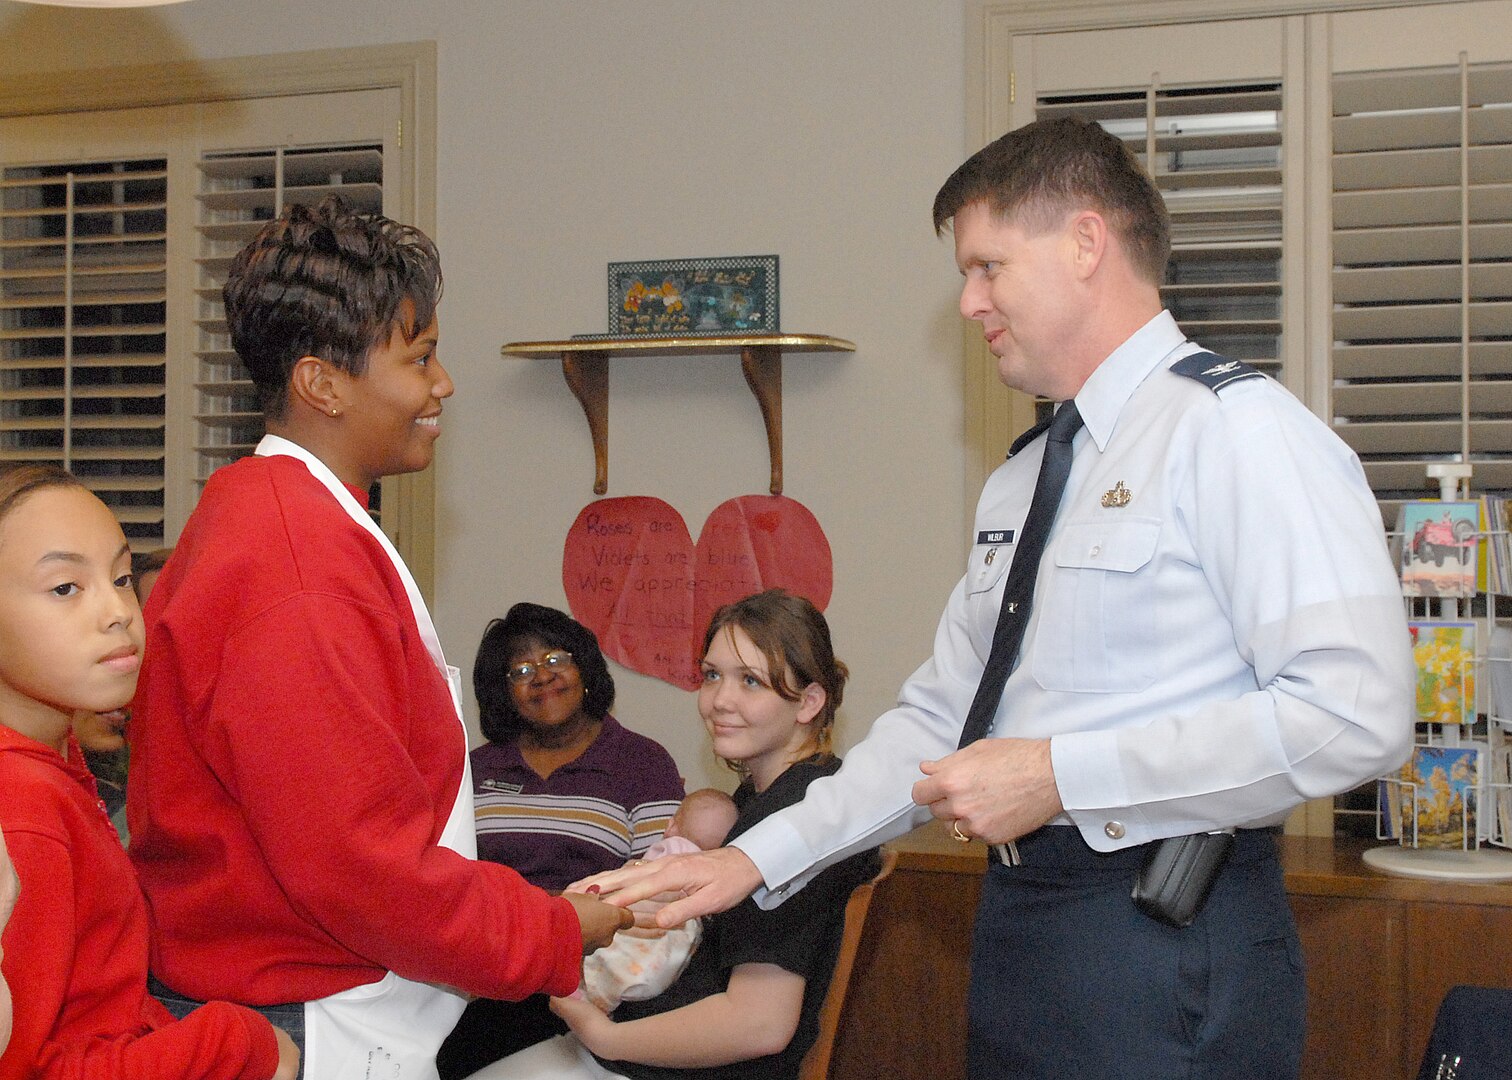 Col. Eric Wilbur, vice commander of the 37th Training Wing at Lackland Air Force Base, Texas, thanks Tech. Sgt. Lakesha S. Washington, 345th Training Squadron, and her daughter, Myesha, for volunteering at the Lackland Fisher House. The African-American Heritage Committee prepared dinner for some 30 patients, family members and staff Feb. 15 as part of a monthlong activities aimed at recognizing African-Americans and their contributions to the country.(USAF photo by Robbin Cresswell) 